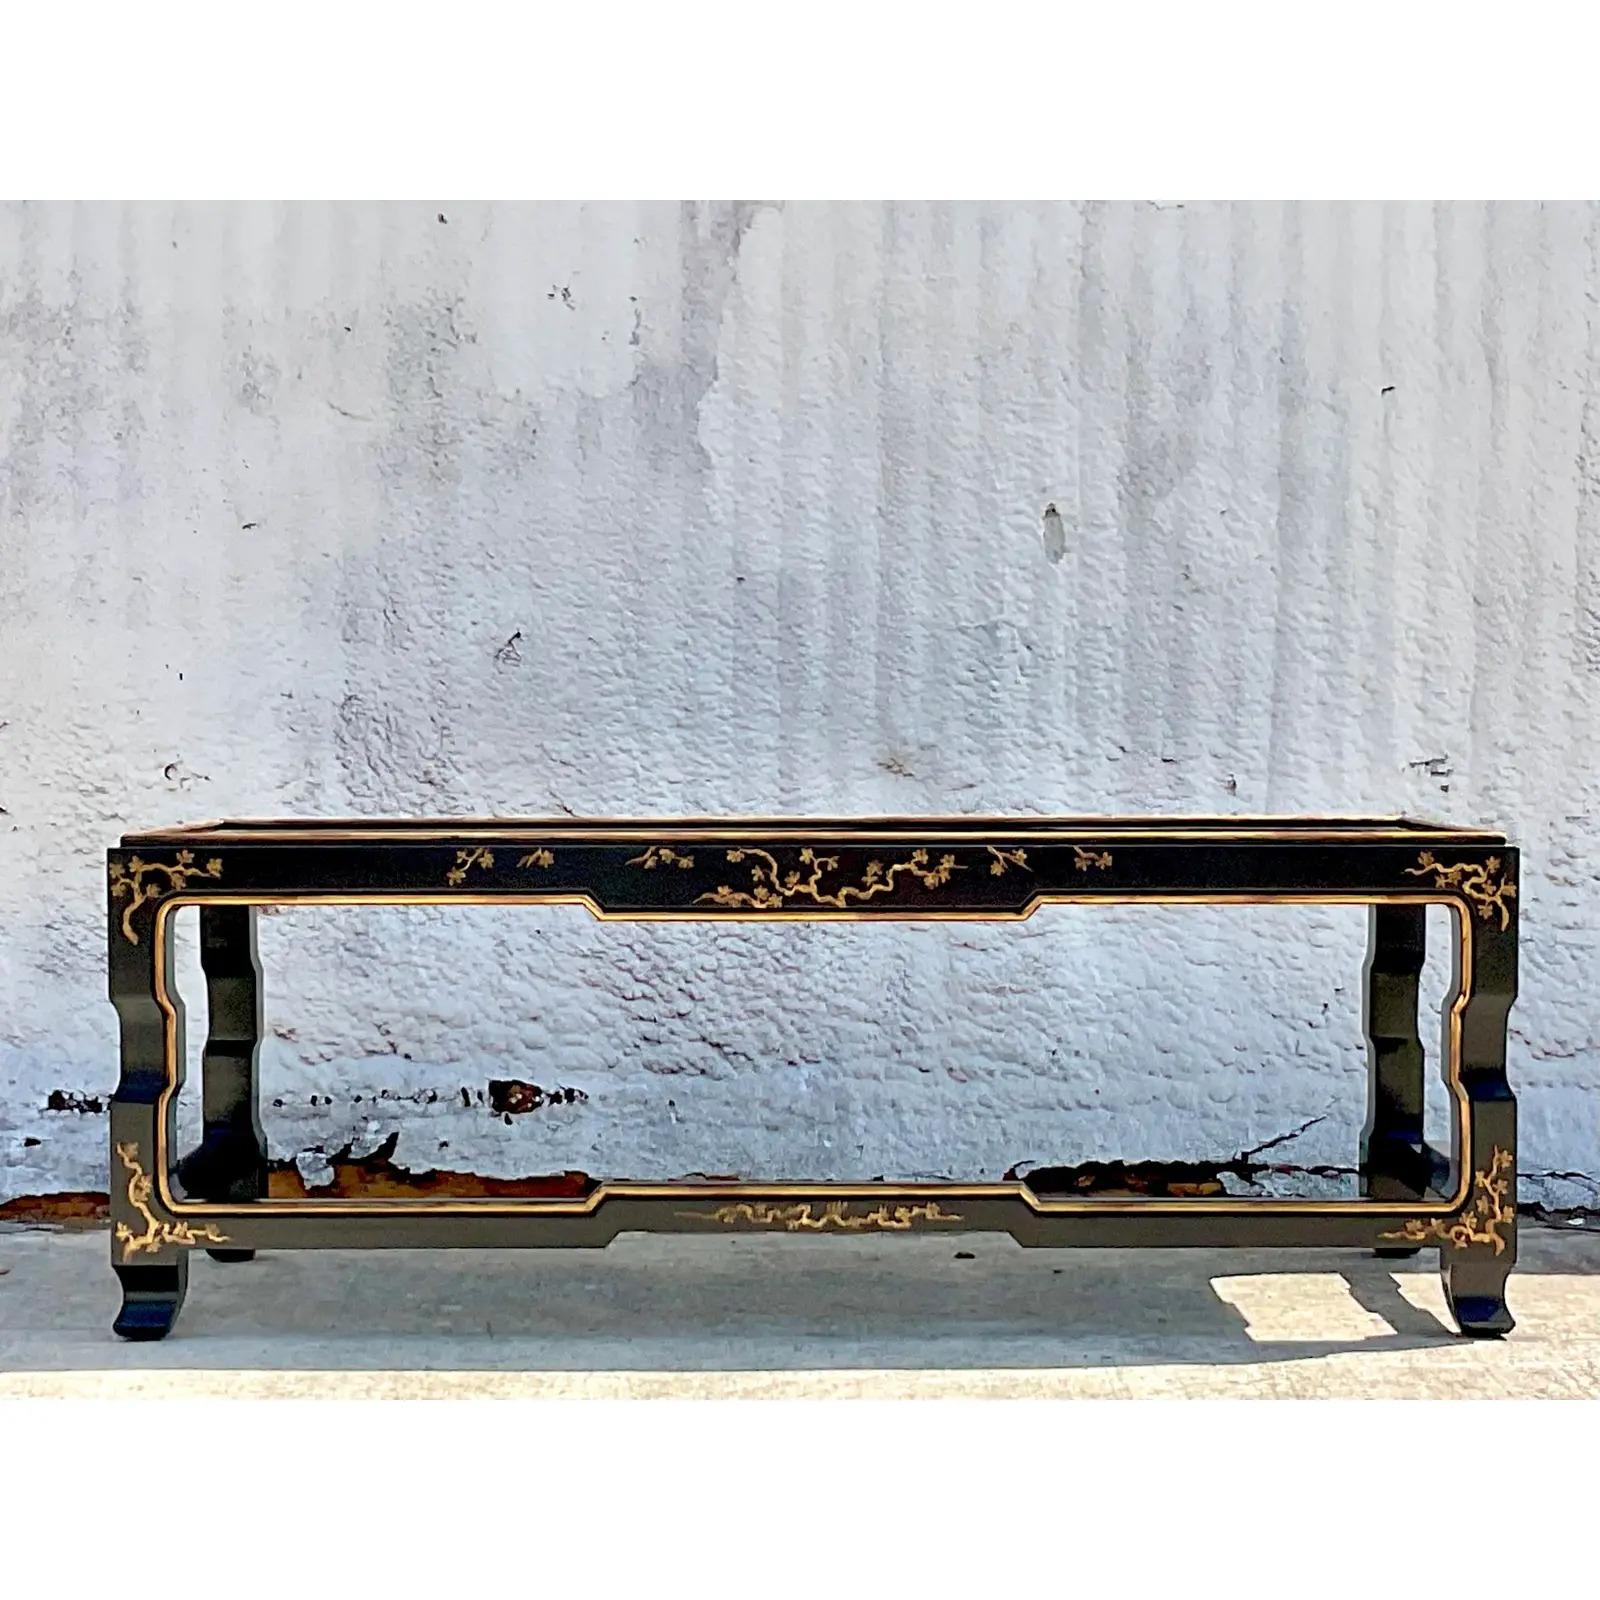 A fantastic vintage Asian Ming coffee table. A beautiful black lacquered forms with hand painted chinoiserie detail. Acquired from a Palm Beach estate.